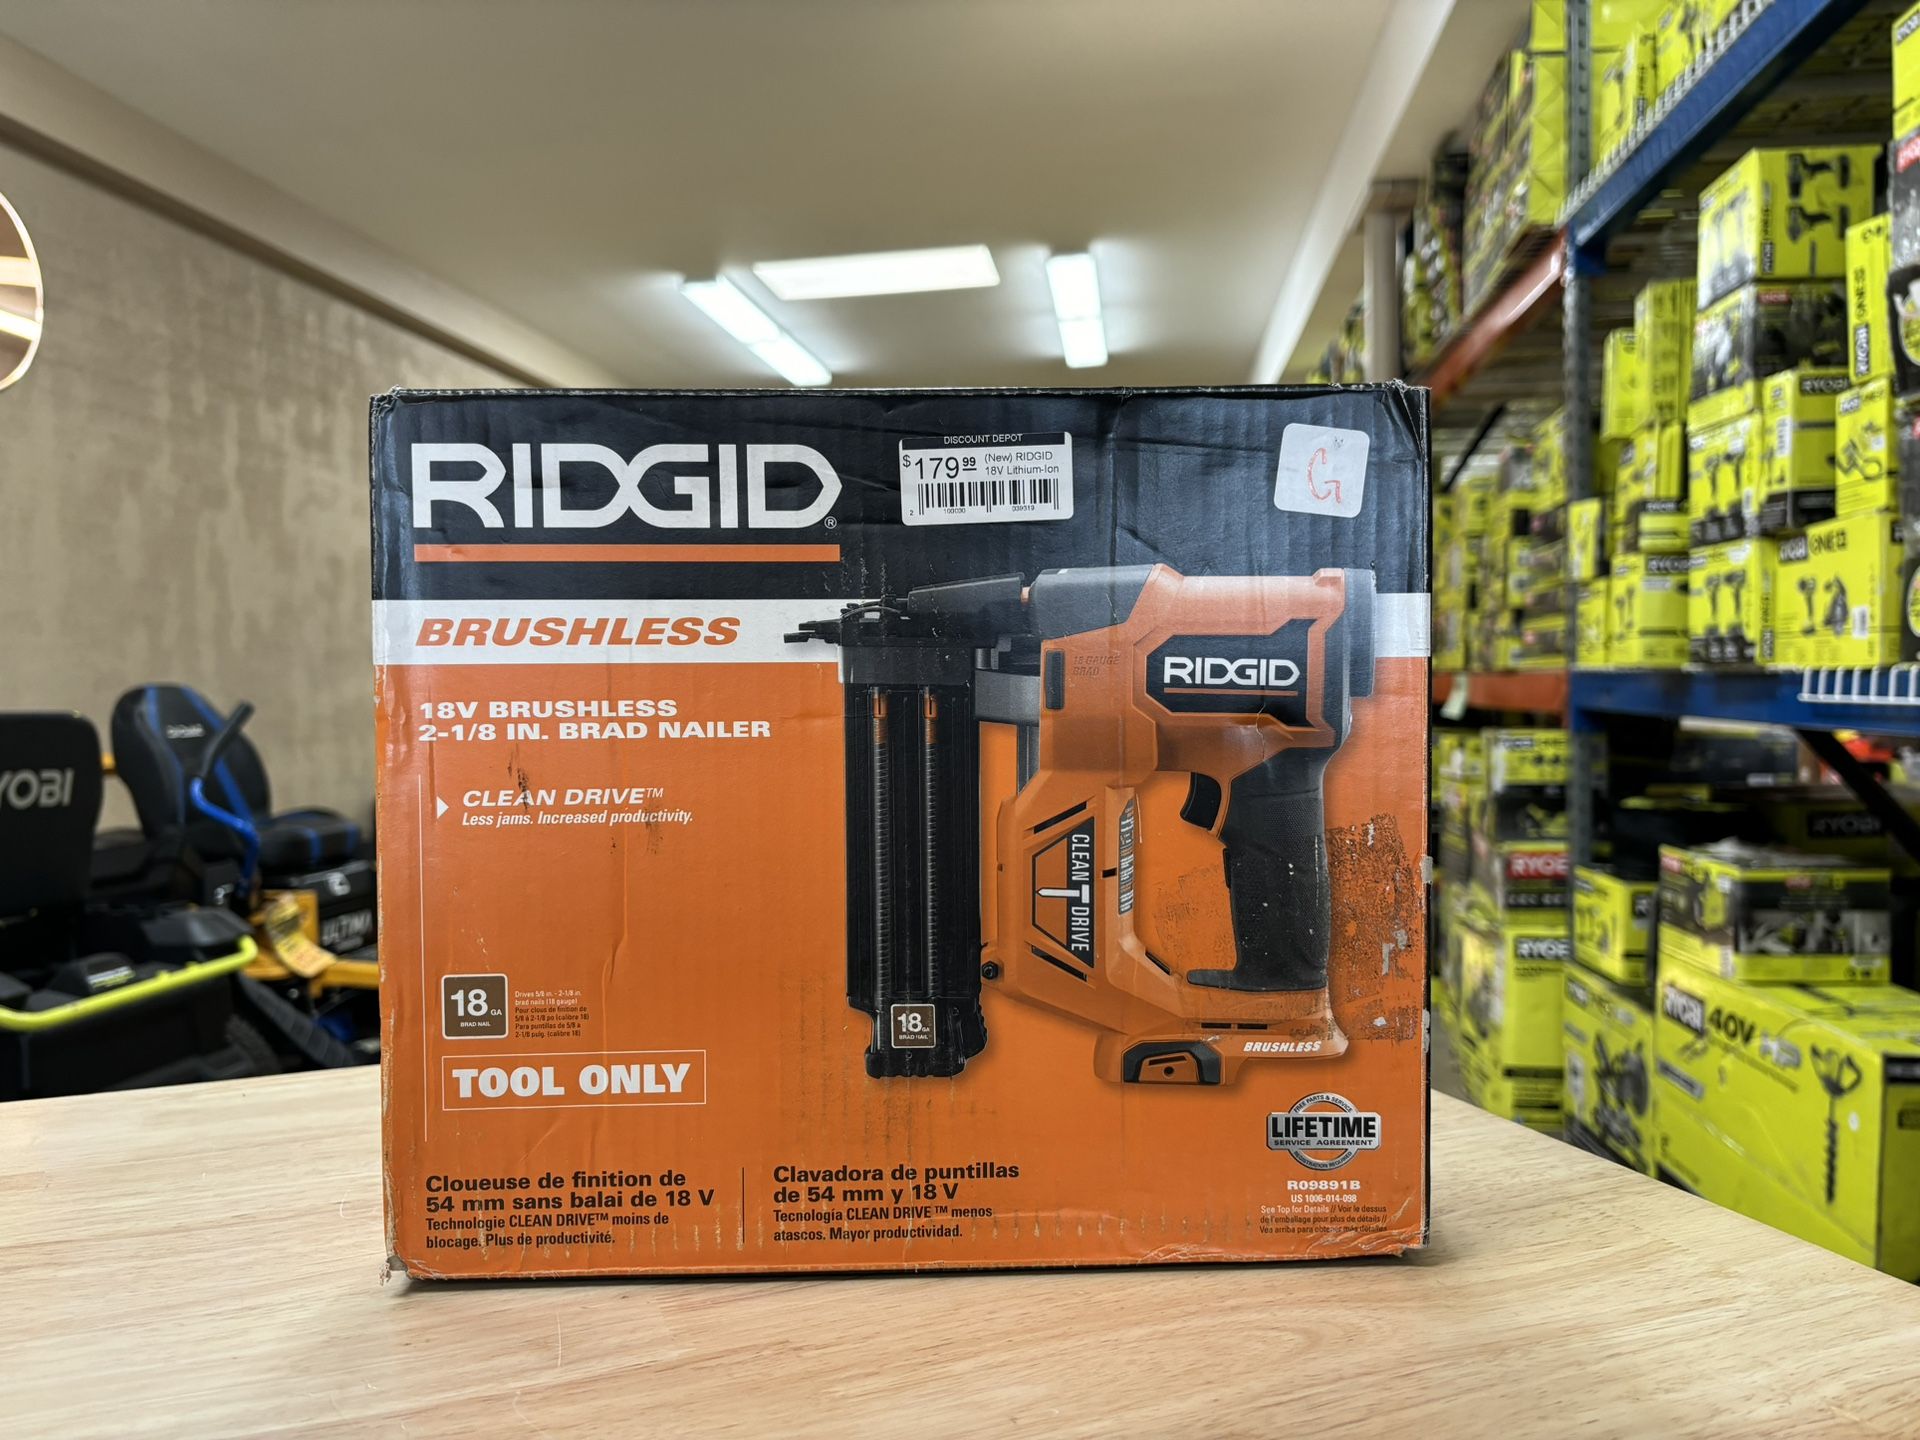 (New) Ridgid 18v Lithium-ion Brushless Cordless 18-Gauge 2-1/8 In. Brad Nailer (tool-only) W/CLEAN DRIVE Technology 